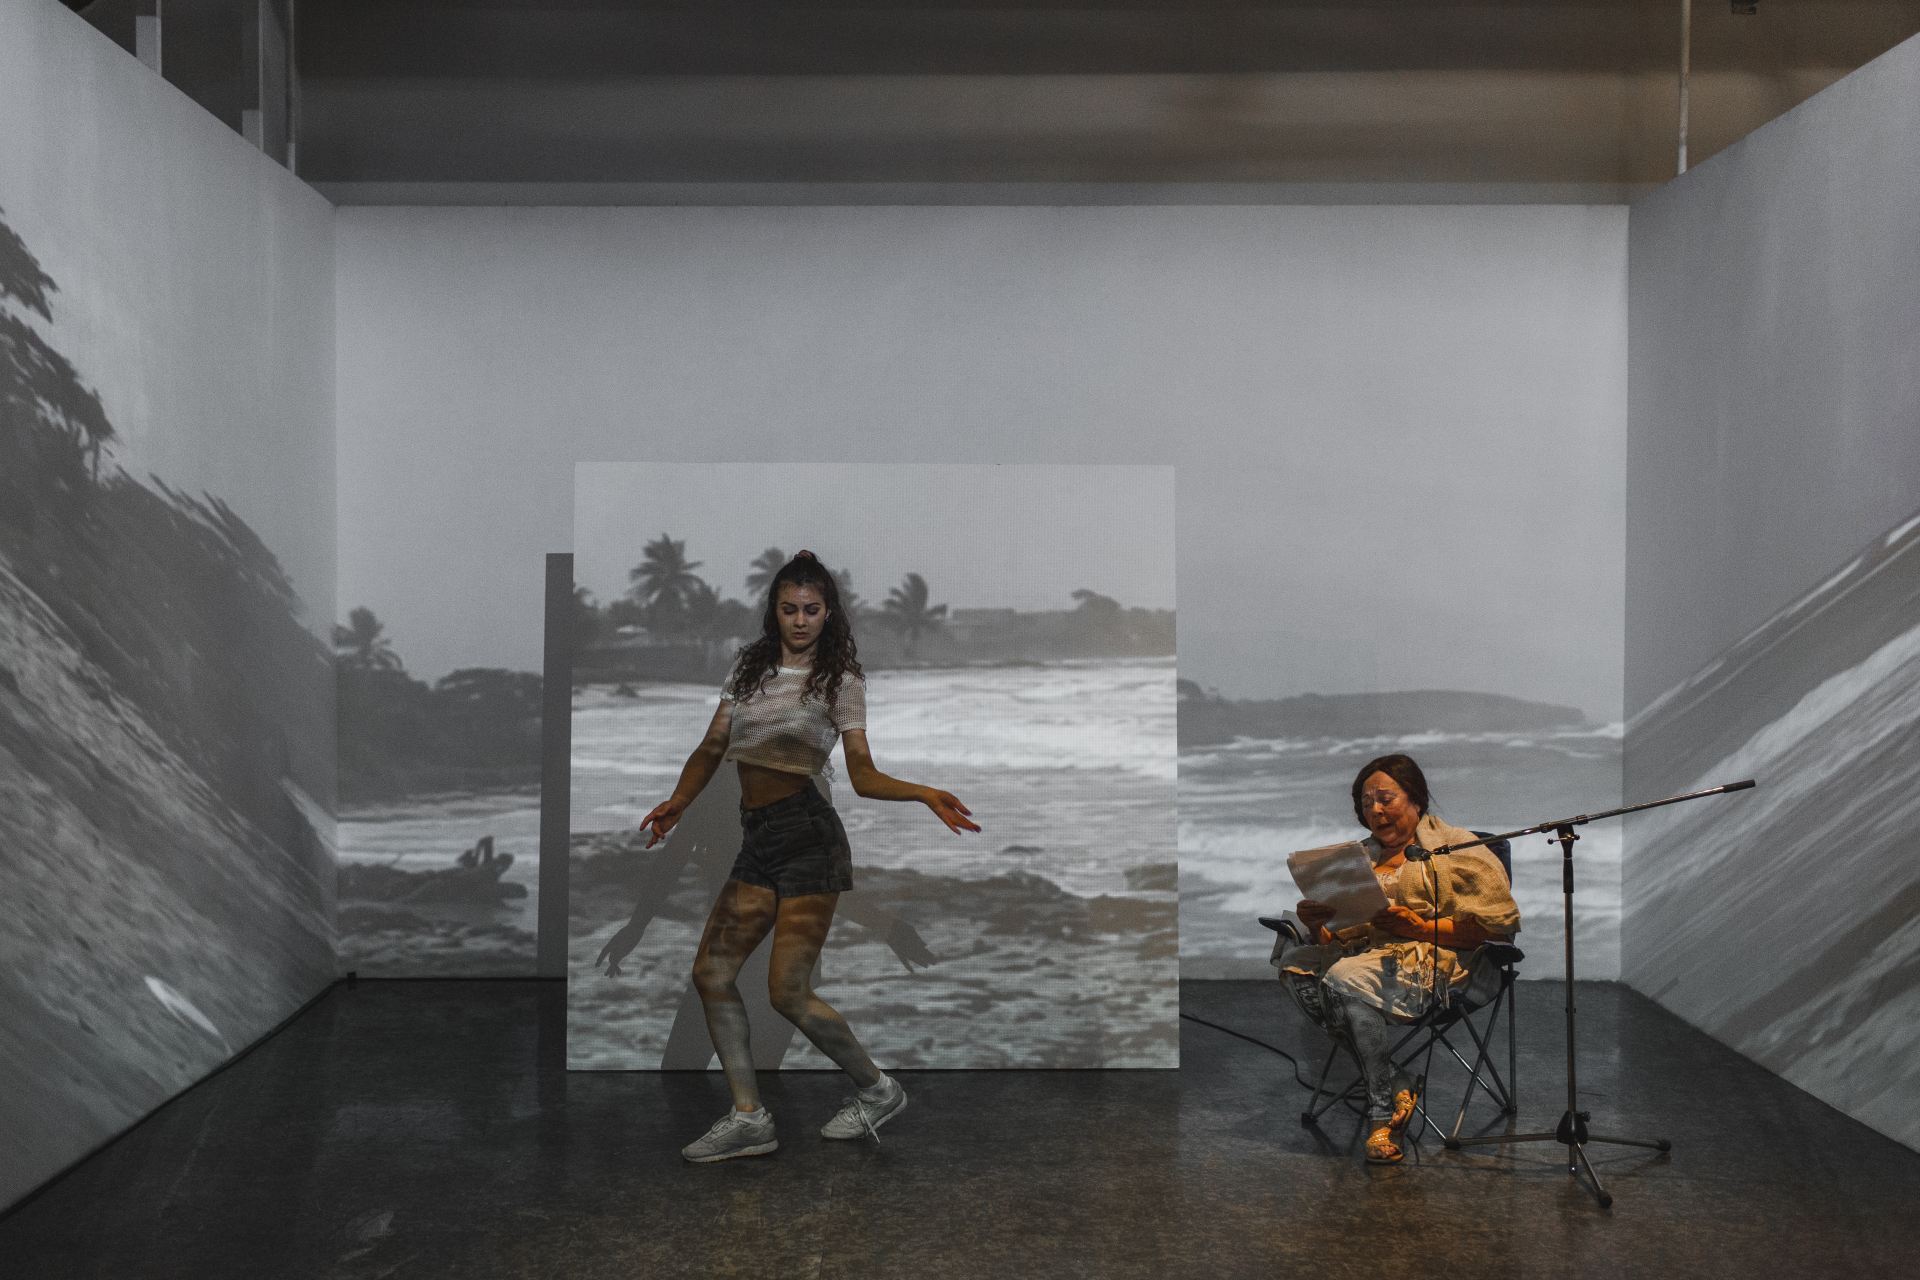 An image of a person dancing and a person sitting and reading. The whole room is covered in a projection of a video of a black and white beach.